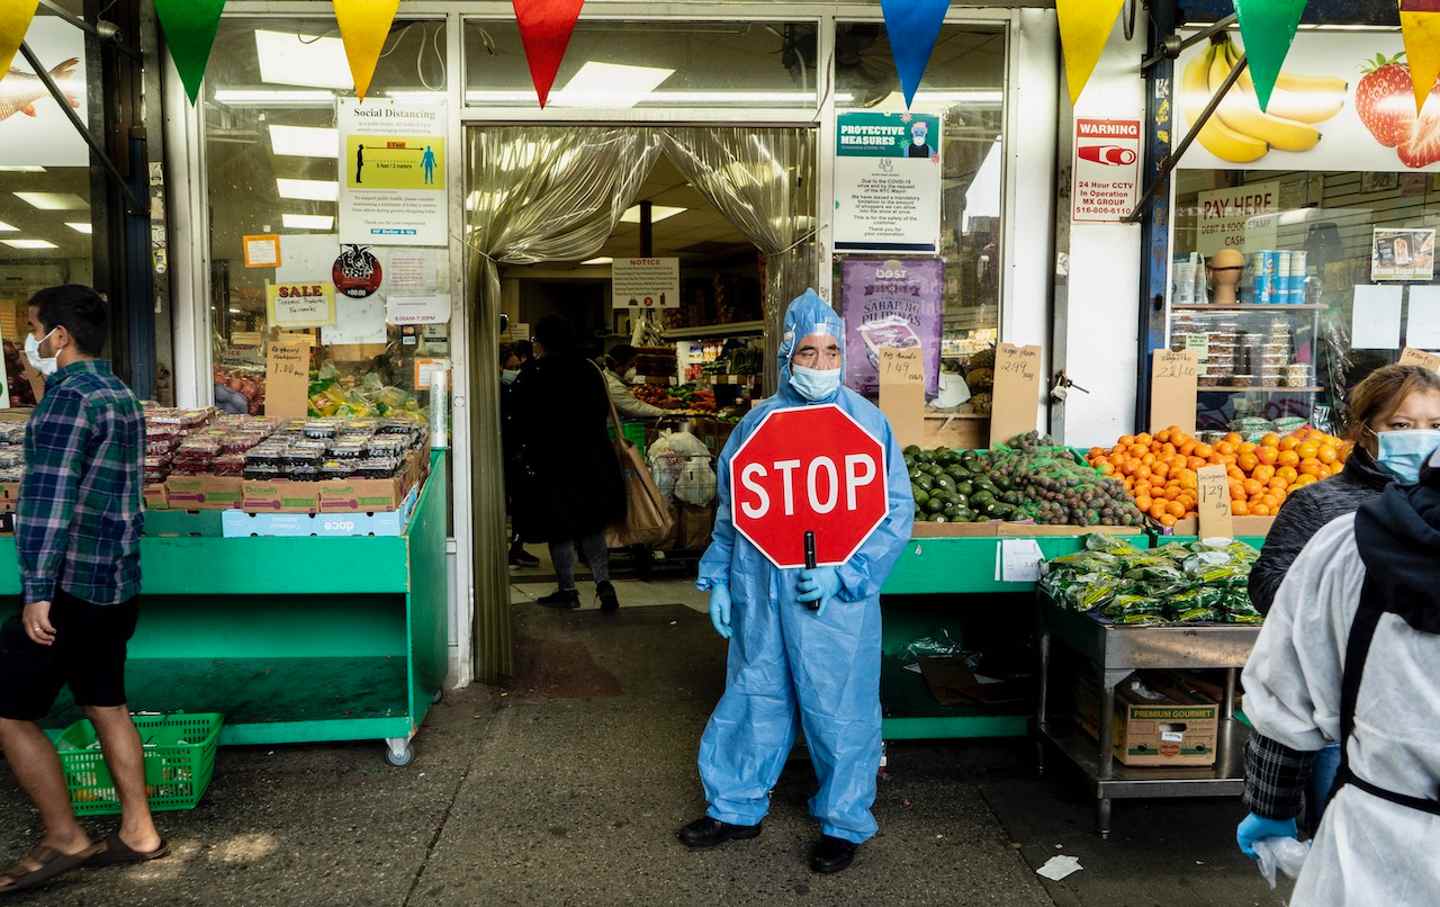 Outside a supermarket, a masked essential worker wearing a blue hazmat suit holds a stop sign.